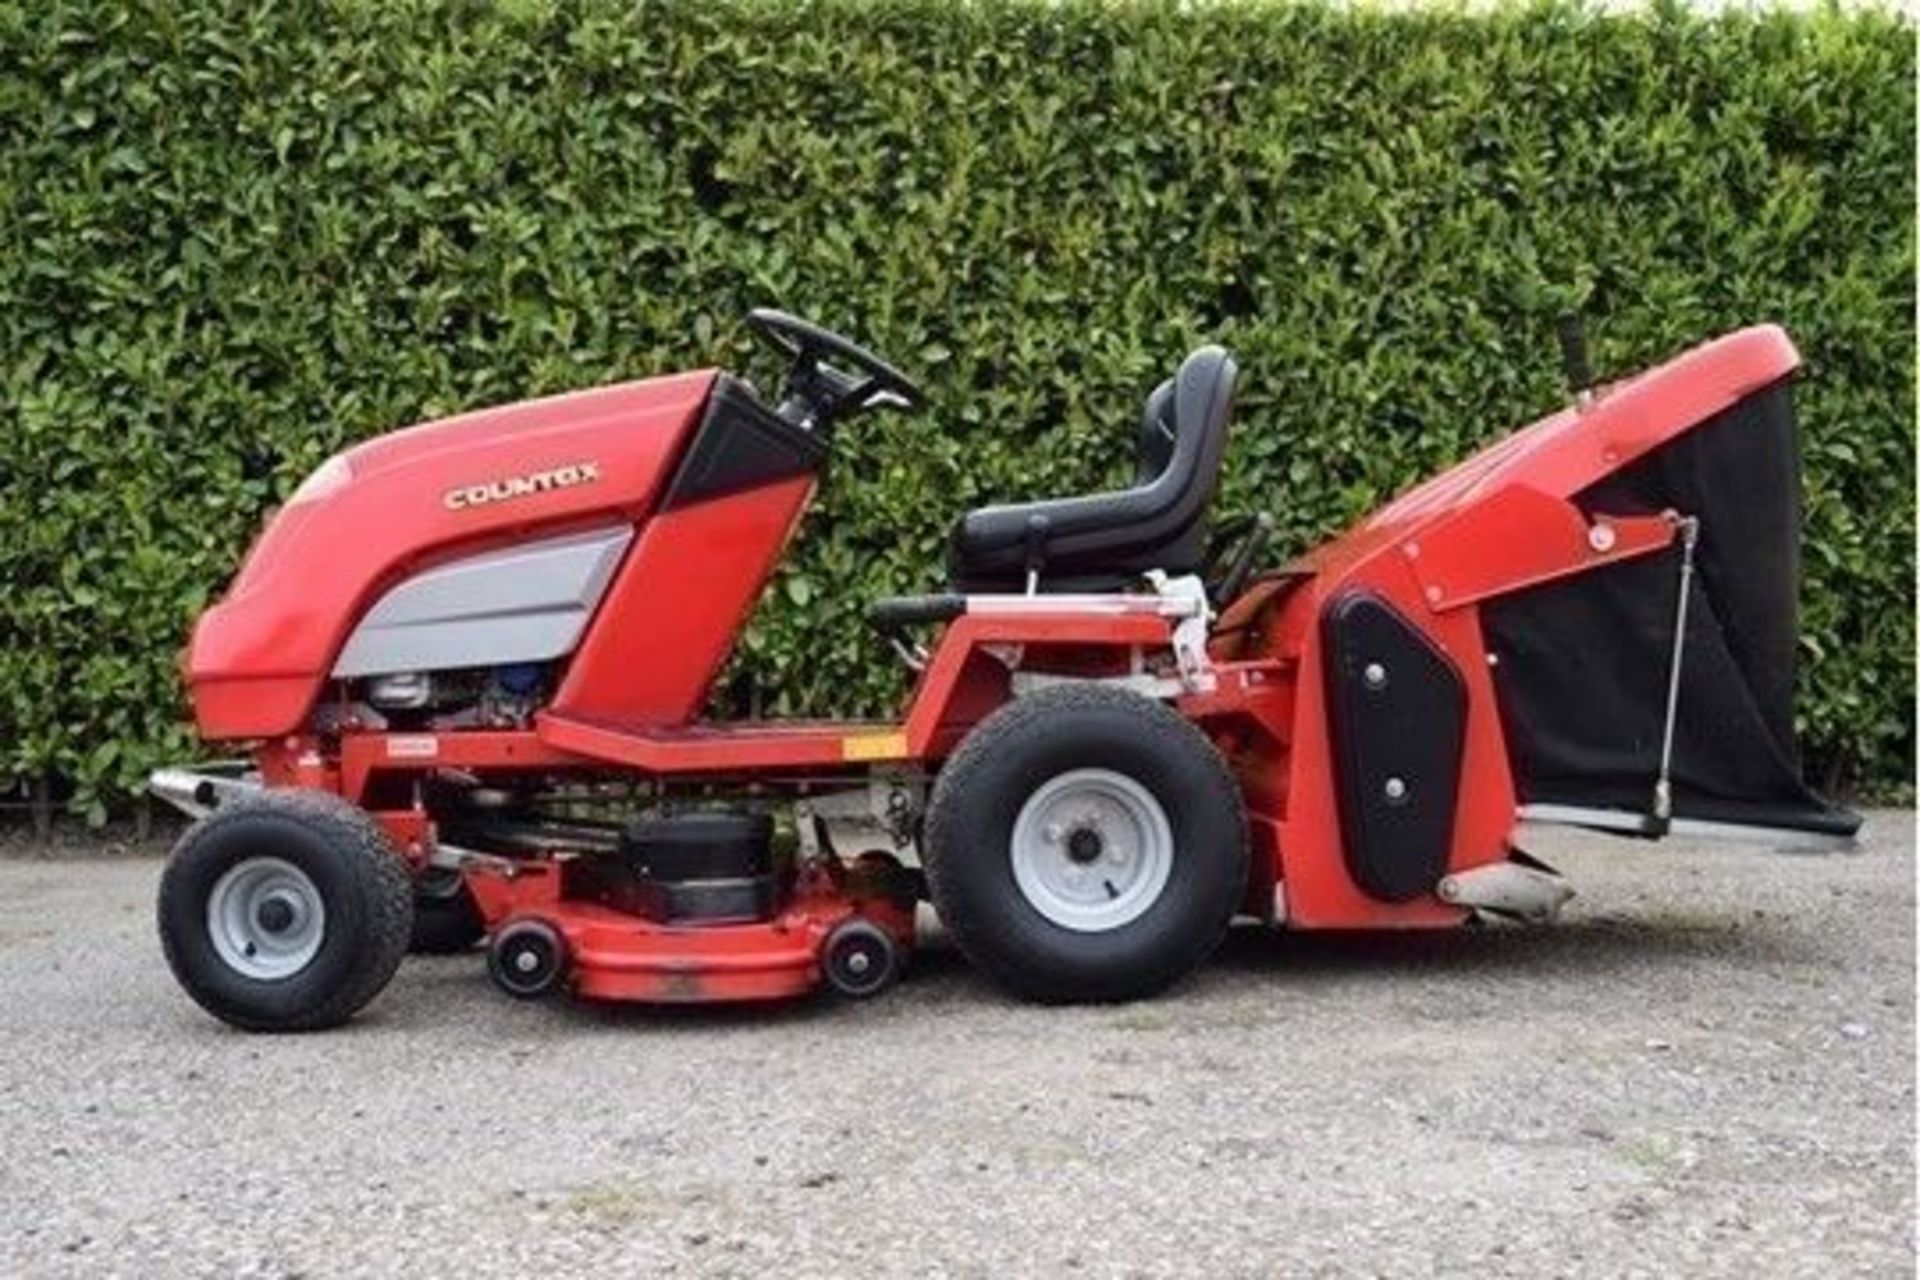 Countax C800H 44" Rear Discharge Garden Tractor - Image 4 of 4